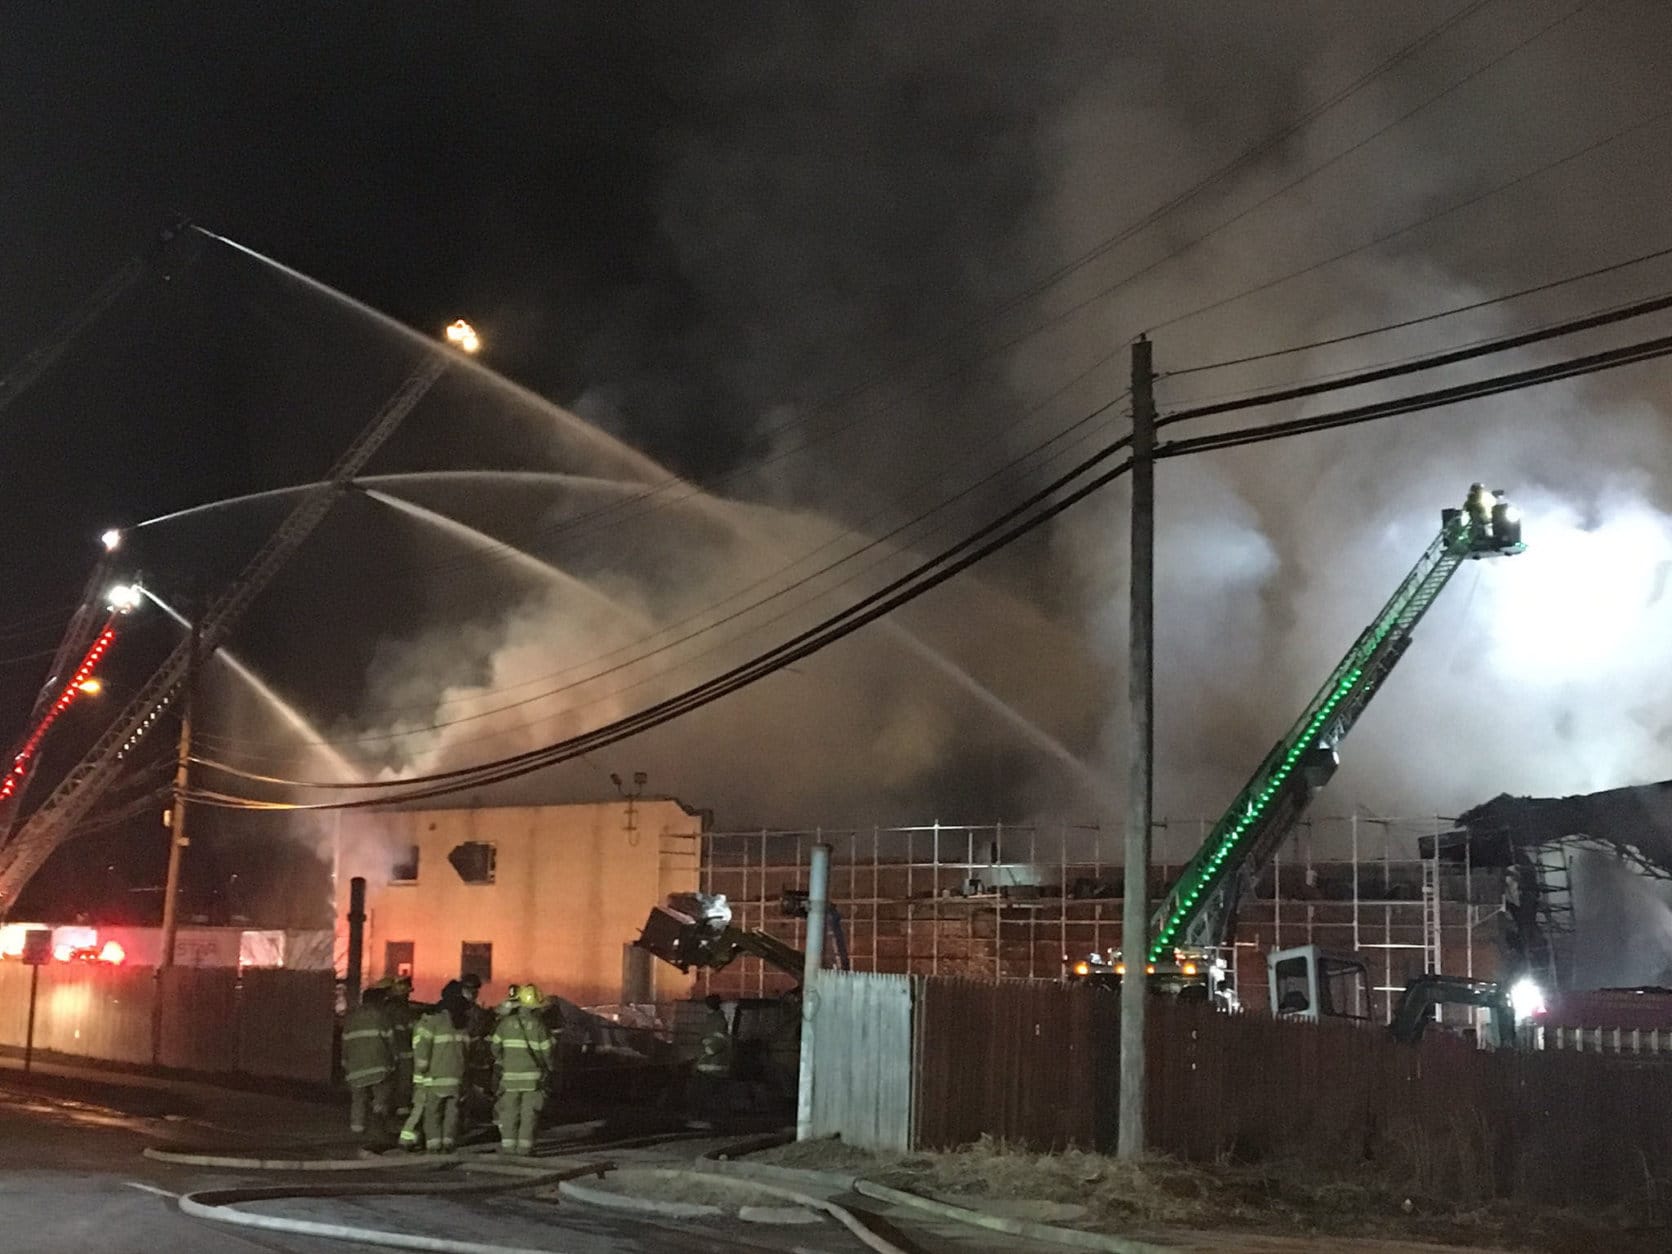 It took several hours for firefighters to get the fire under control and the "deep seated" fire continued to burn and smolder through the night, Prince George’s County Fire EMS spokesman Mike Brady said. (Courtesy Prince George's County Fire Department)